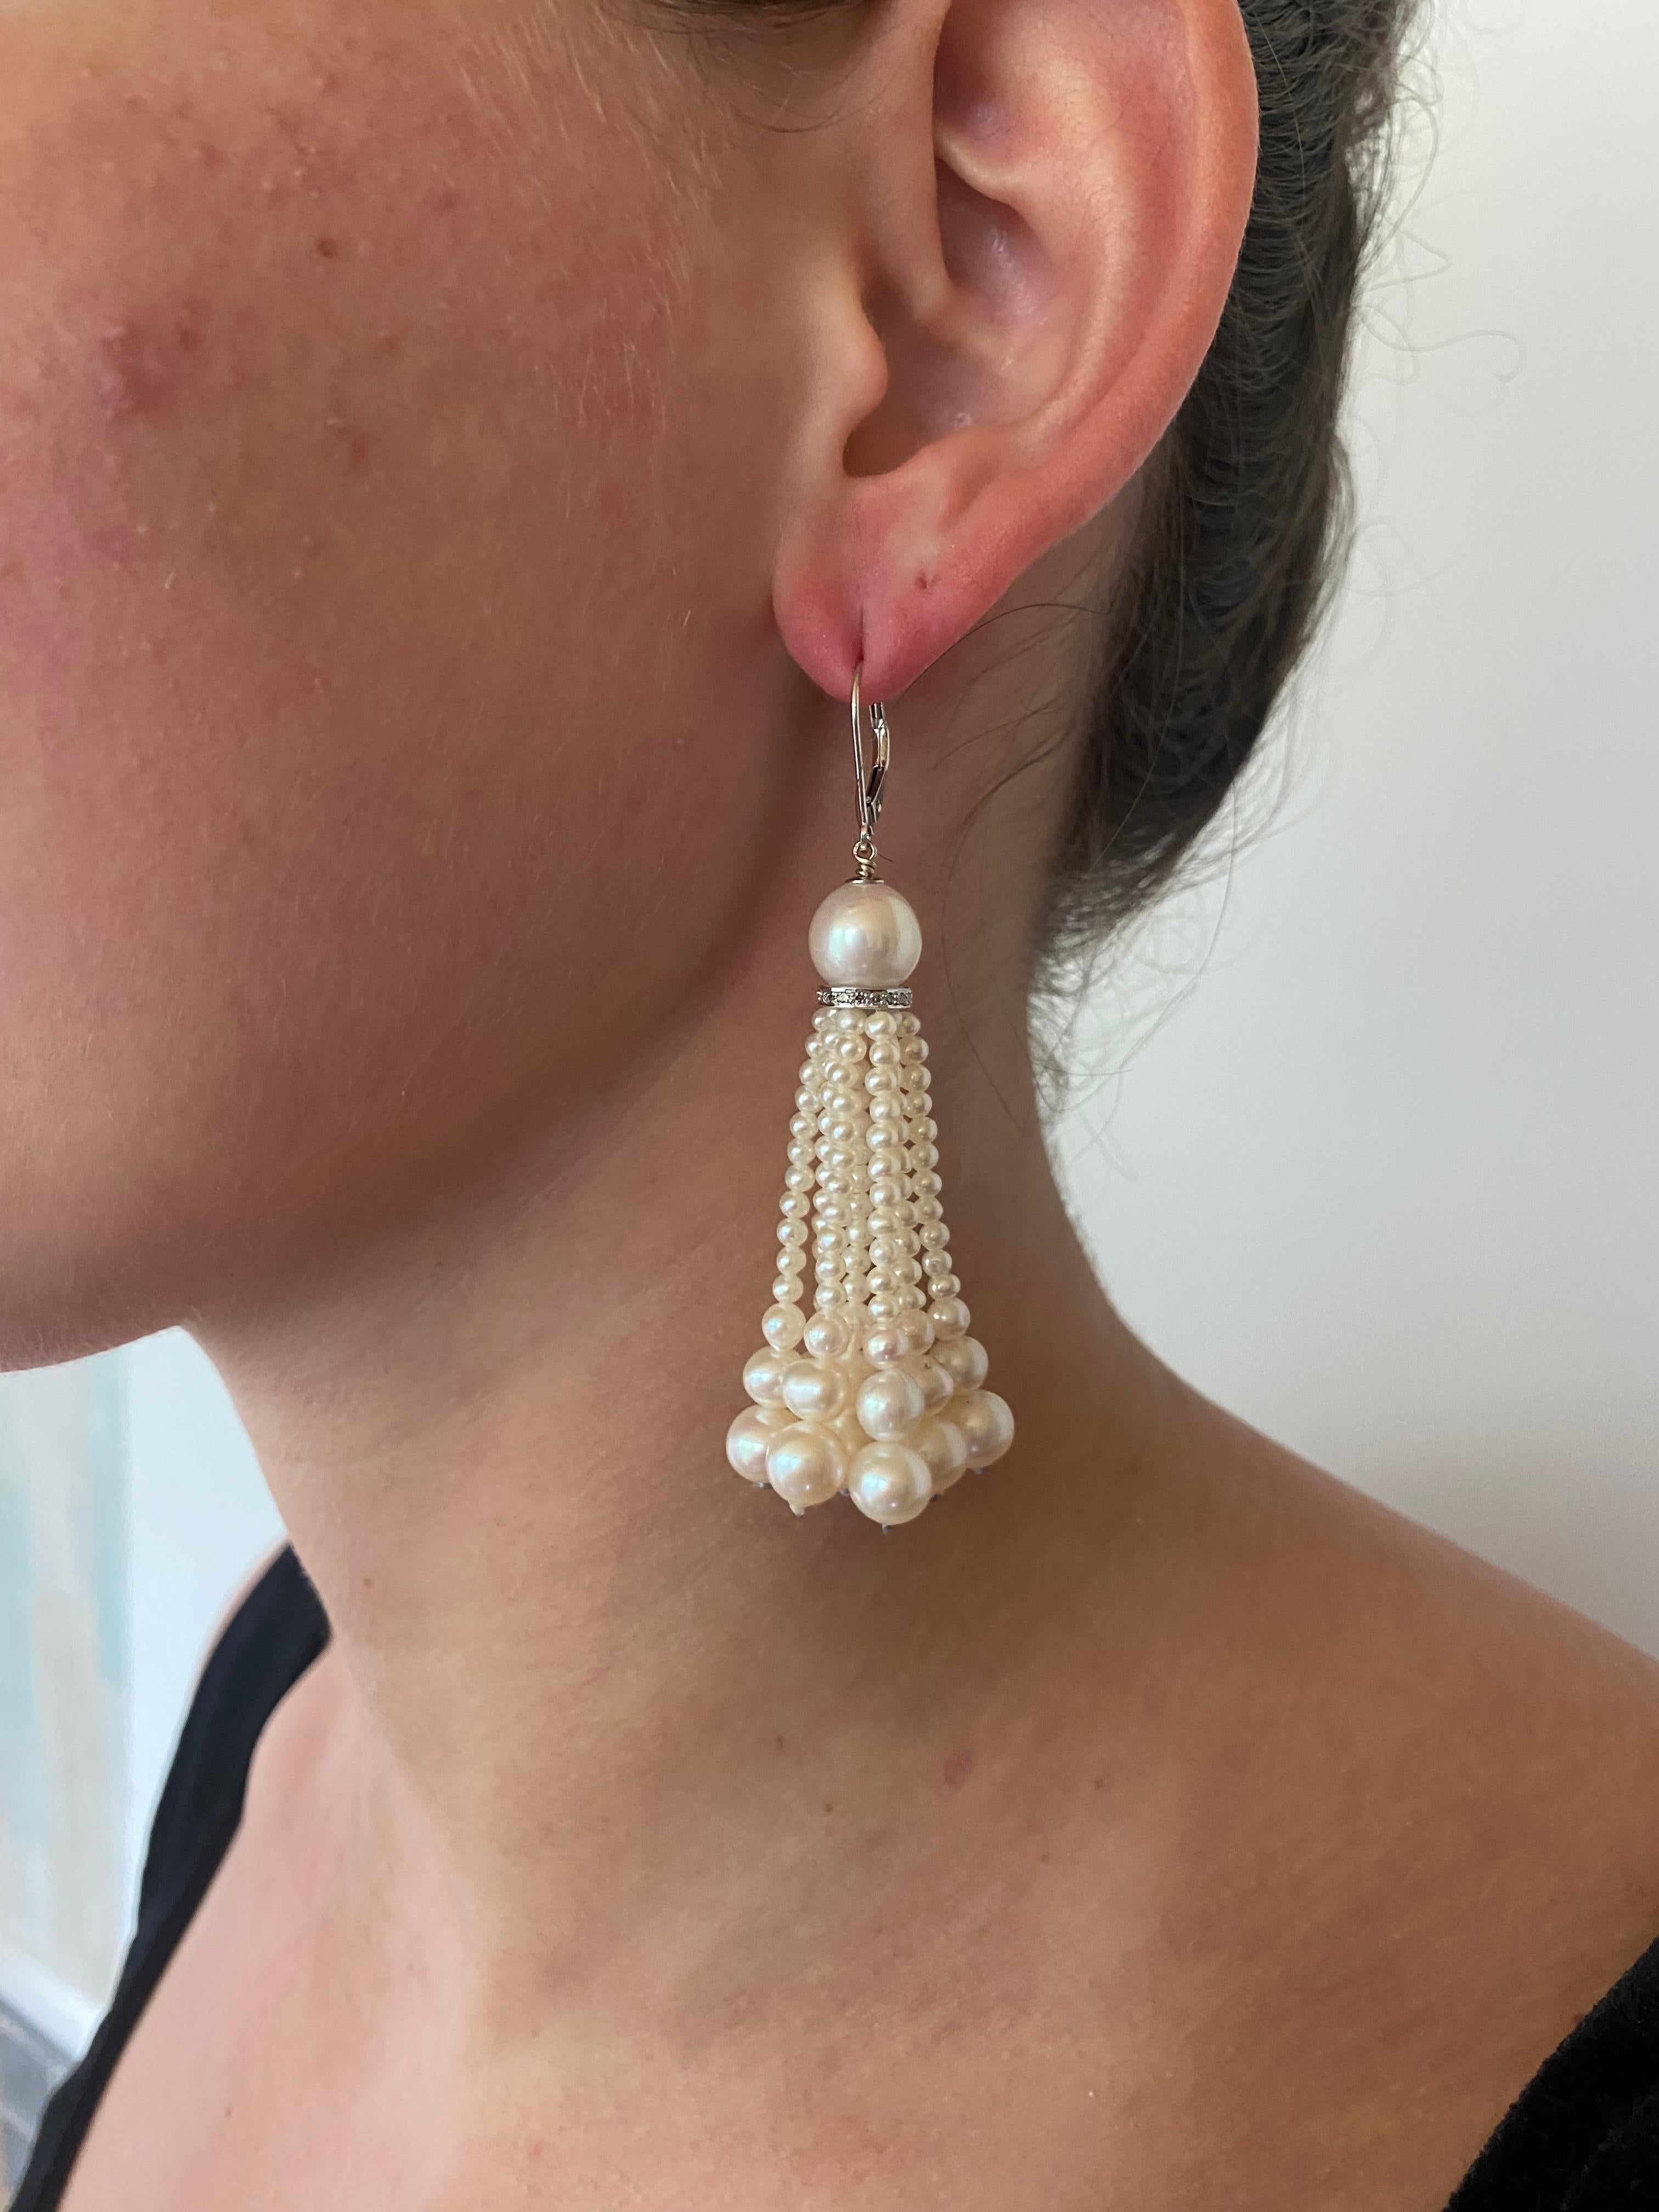 Simple yet gorgeous pair of Earrings by Marina J. Each Earring features a round Pearl sitting atop a Diamond encrusted roundel from which multiple strands of Graduated Pearls hang. The White Gold perfect accents the luster of the Pearls while the